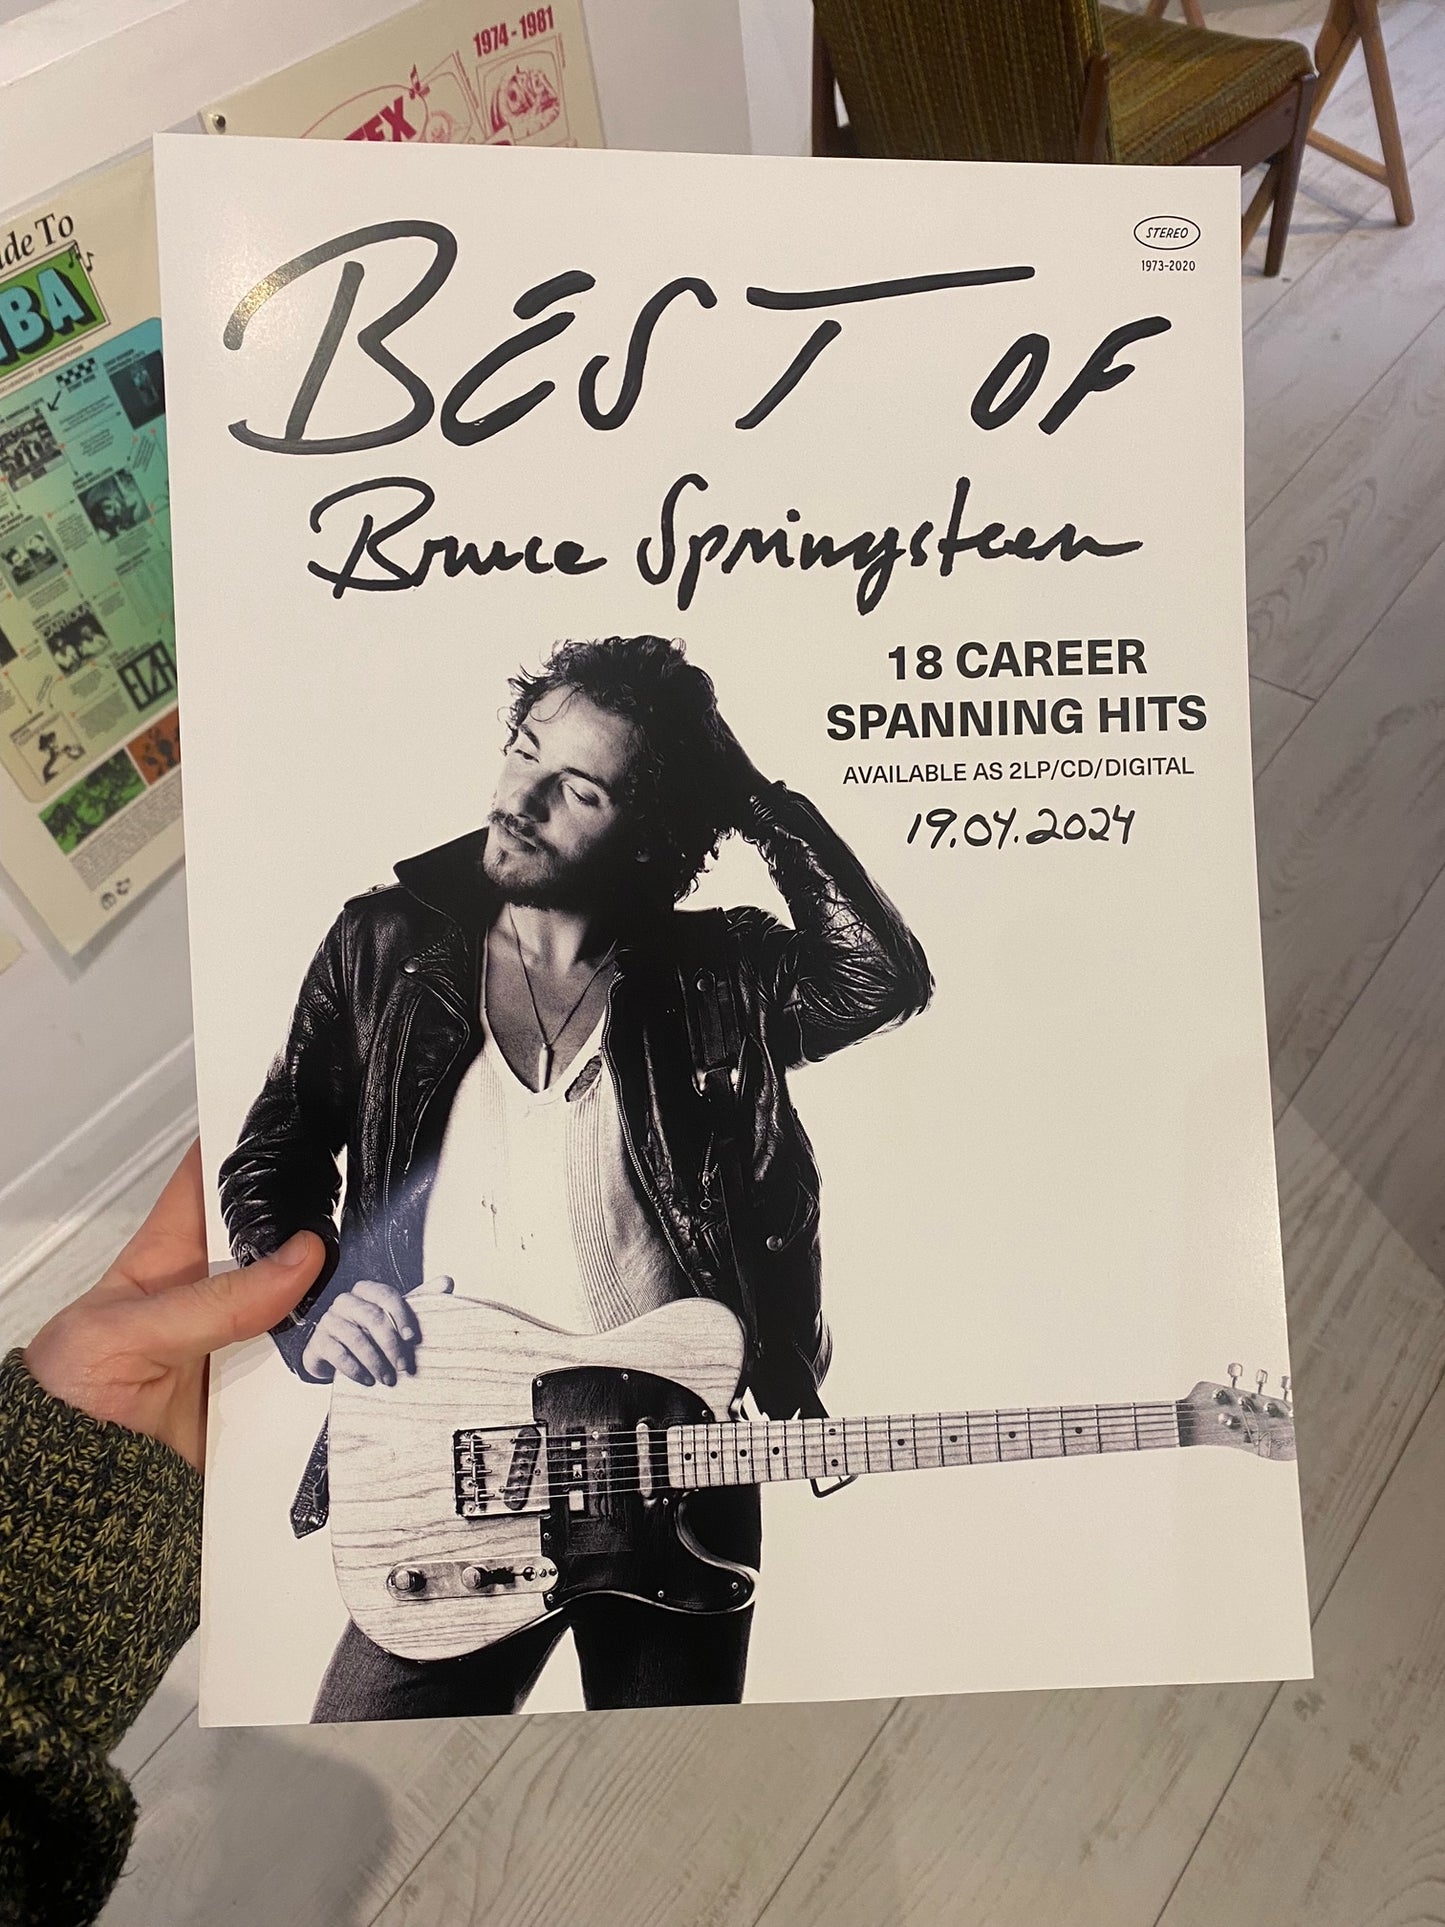 Bruce Springsteen - Best of Bruce Springsteen **INCLUDES EXCLUSIVE POSTER**